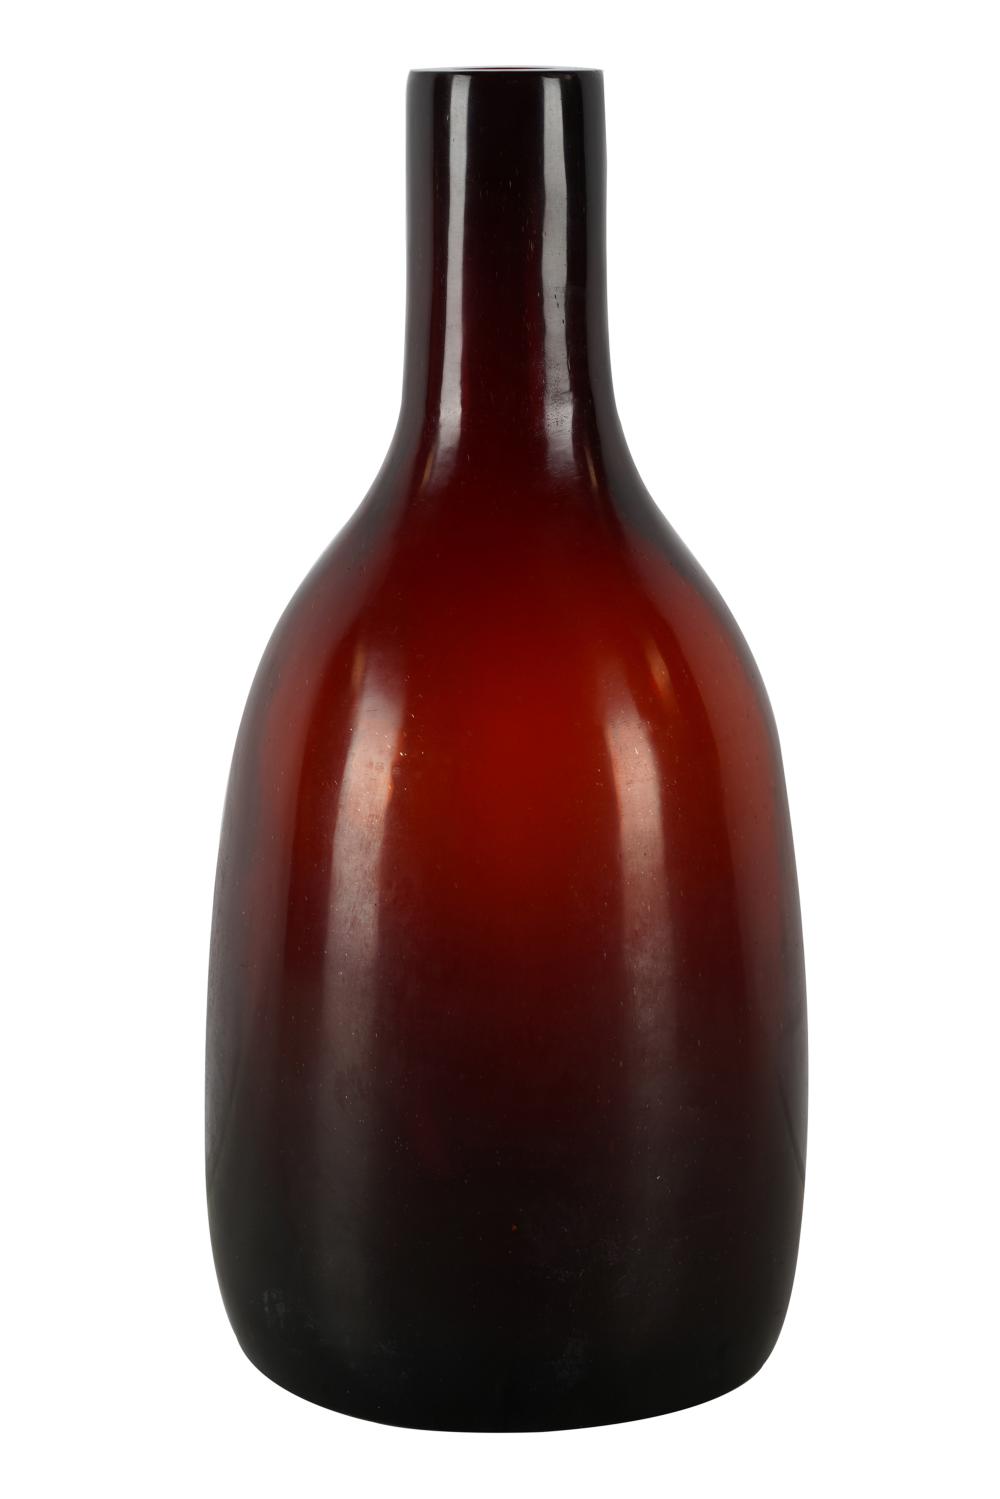 RED ART GLASS BOTTLE VASEwith illegible 3336d7